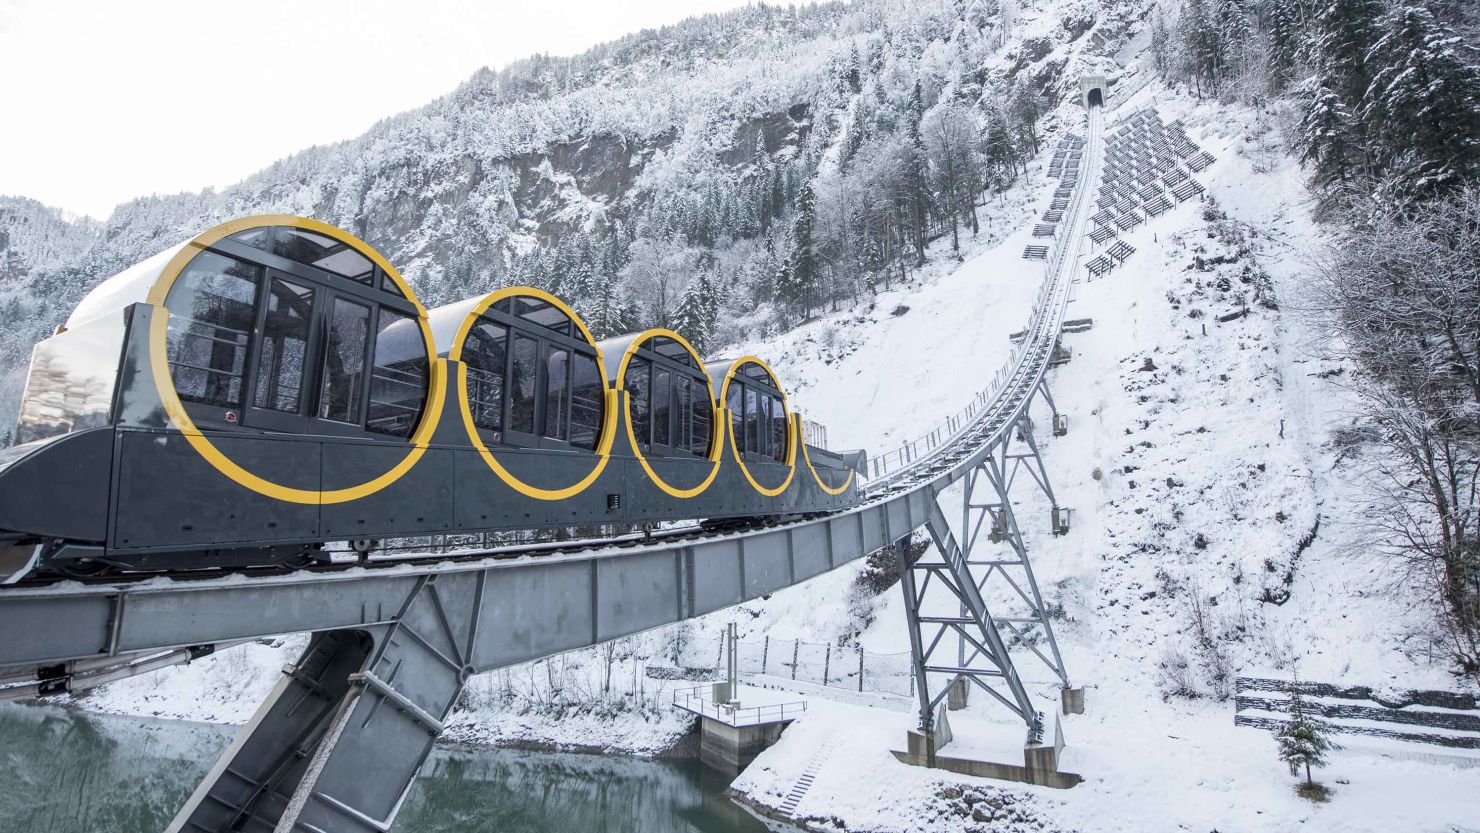 The world's steepest funicular cost $52.6 million to build. 